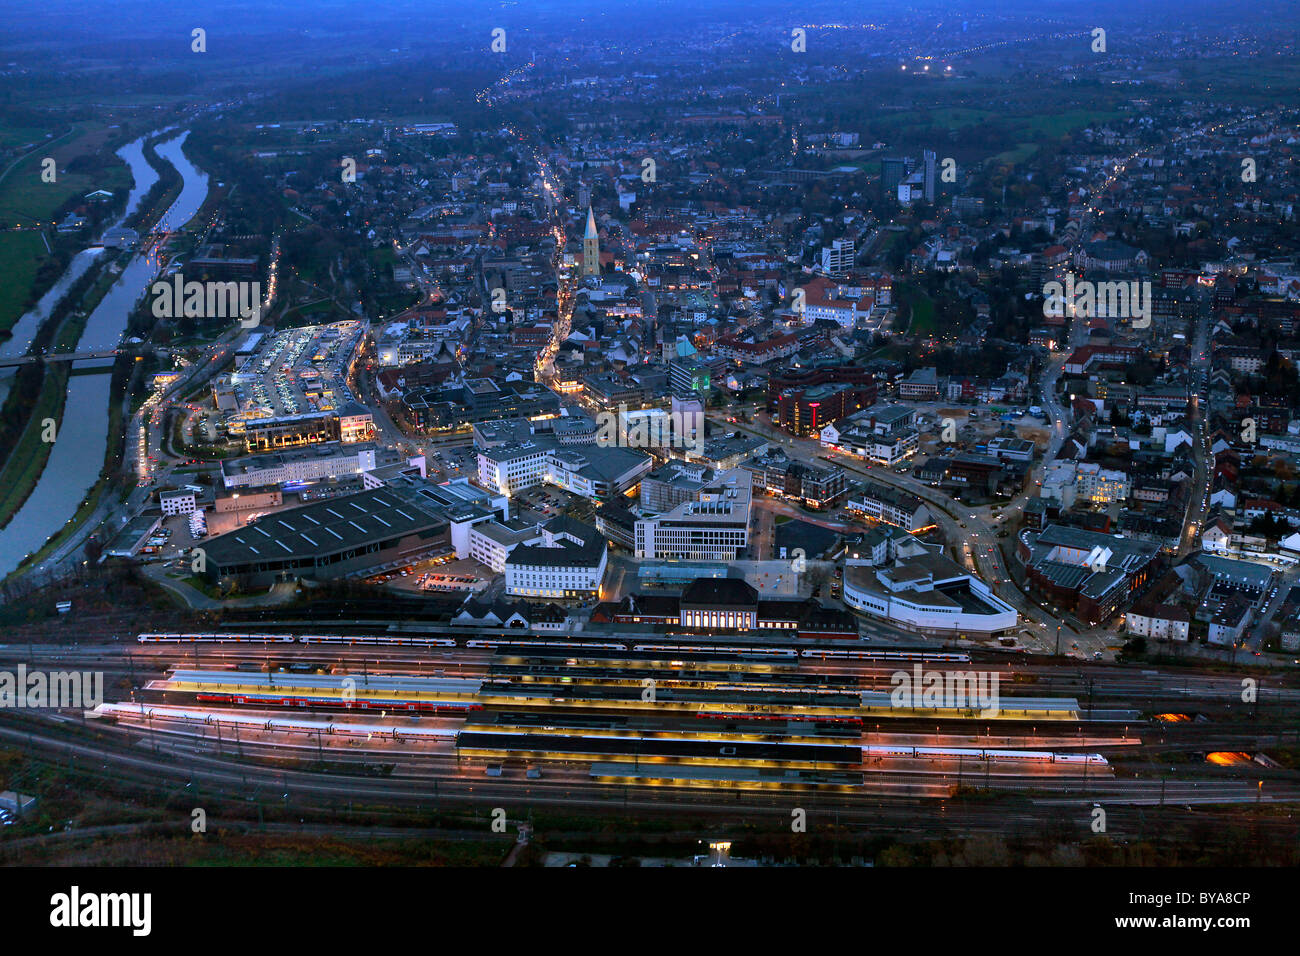 Aerial view, Allee-Center mall at night, central station, Hamm, Ruhrgebiet region, North Rhine-Westphalia, Germany, Europe Stock Photo